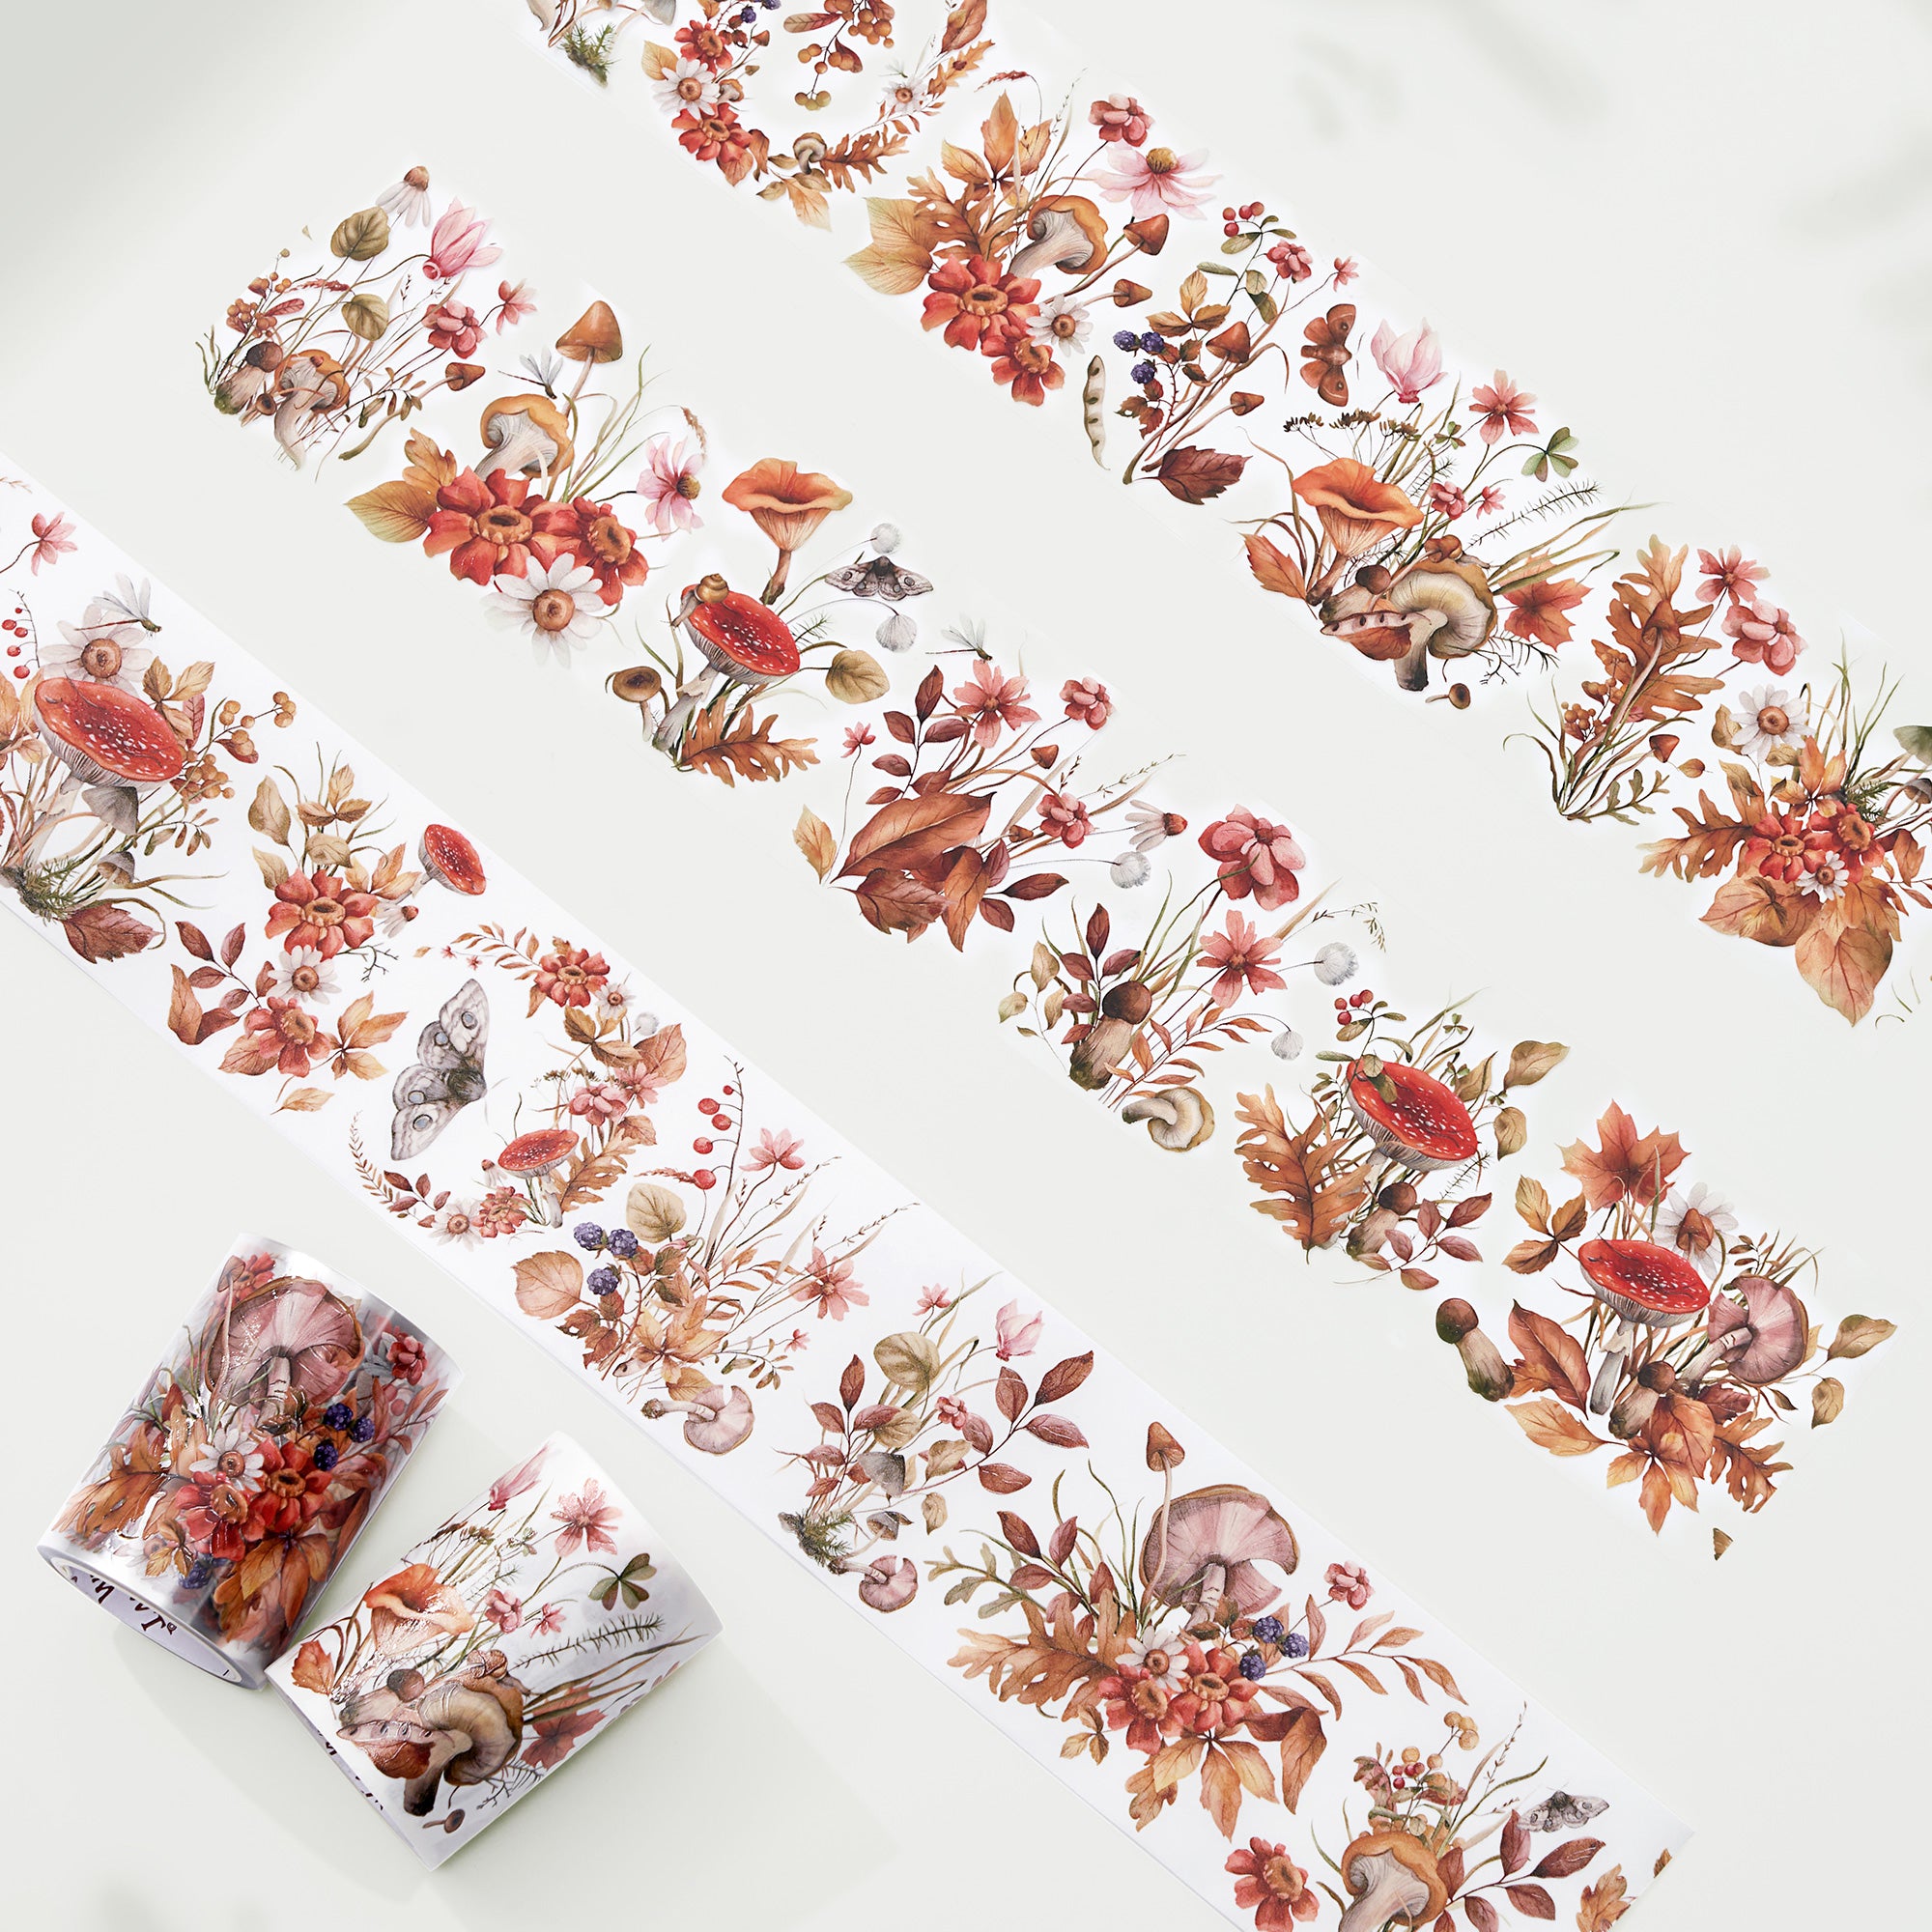 Gold Lace Washi Tape Sample Taiwanese Stationery Artist Illustrated 25cm  Loop, Gift With Every Purchase 